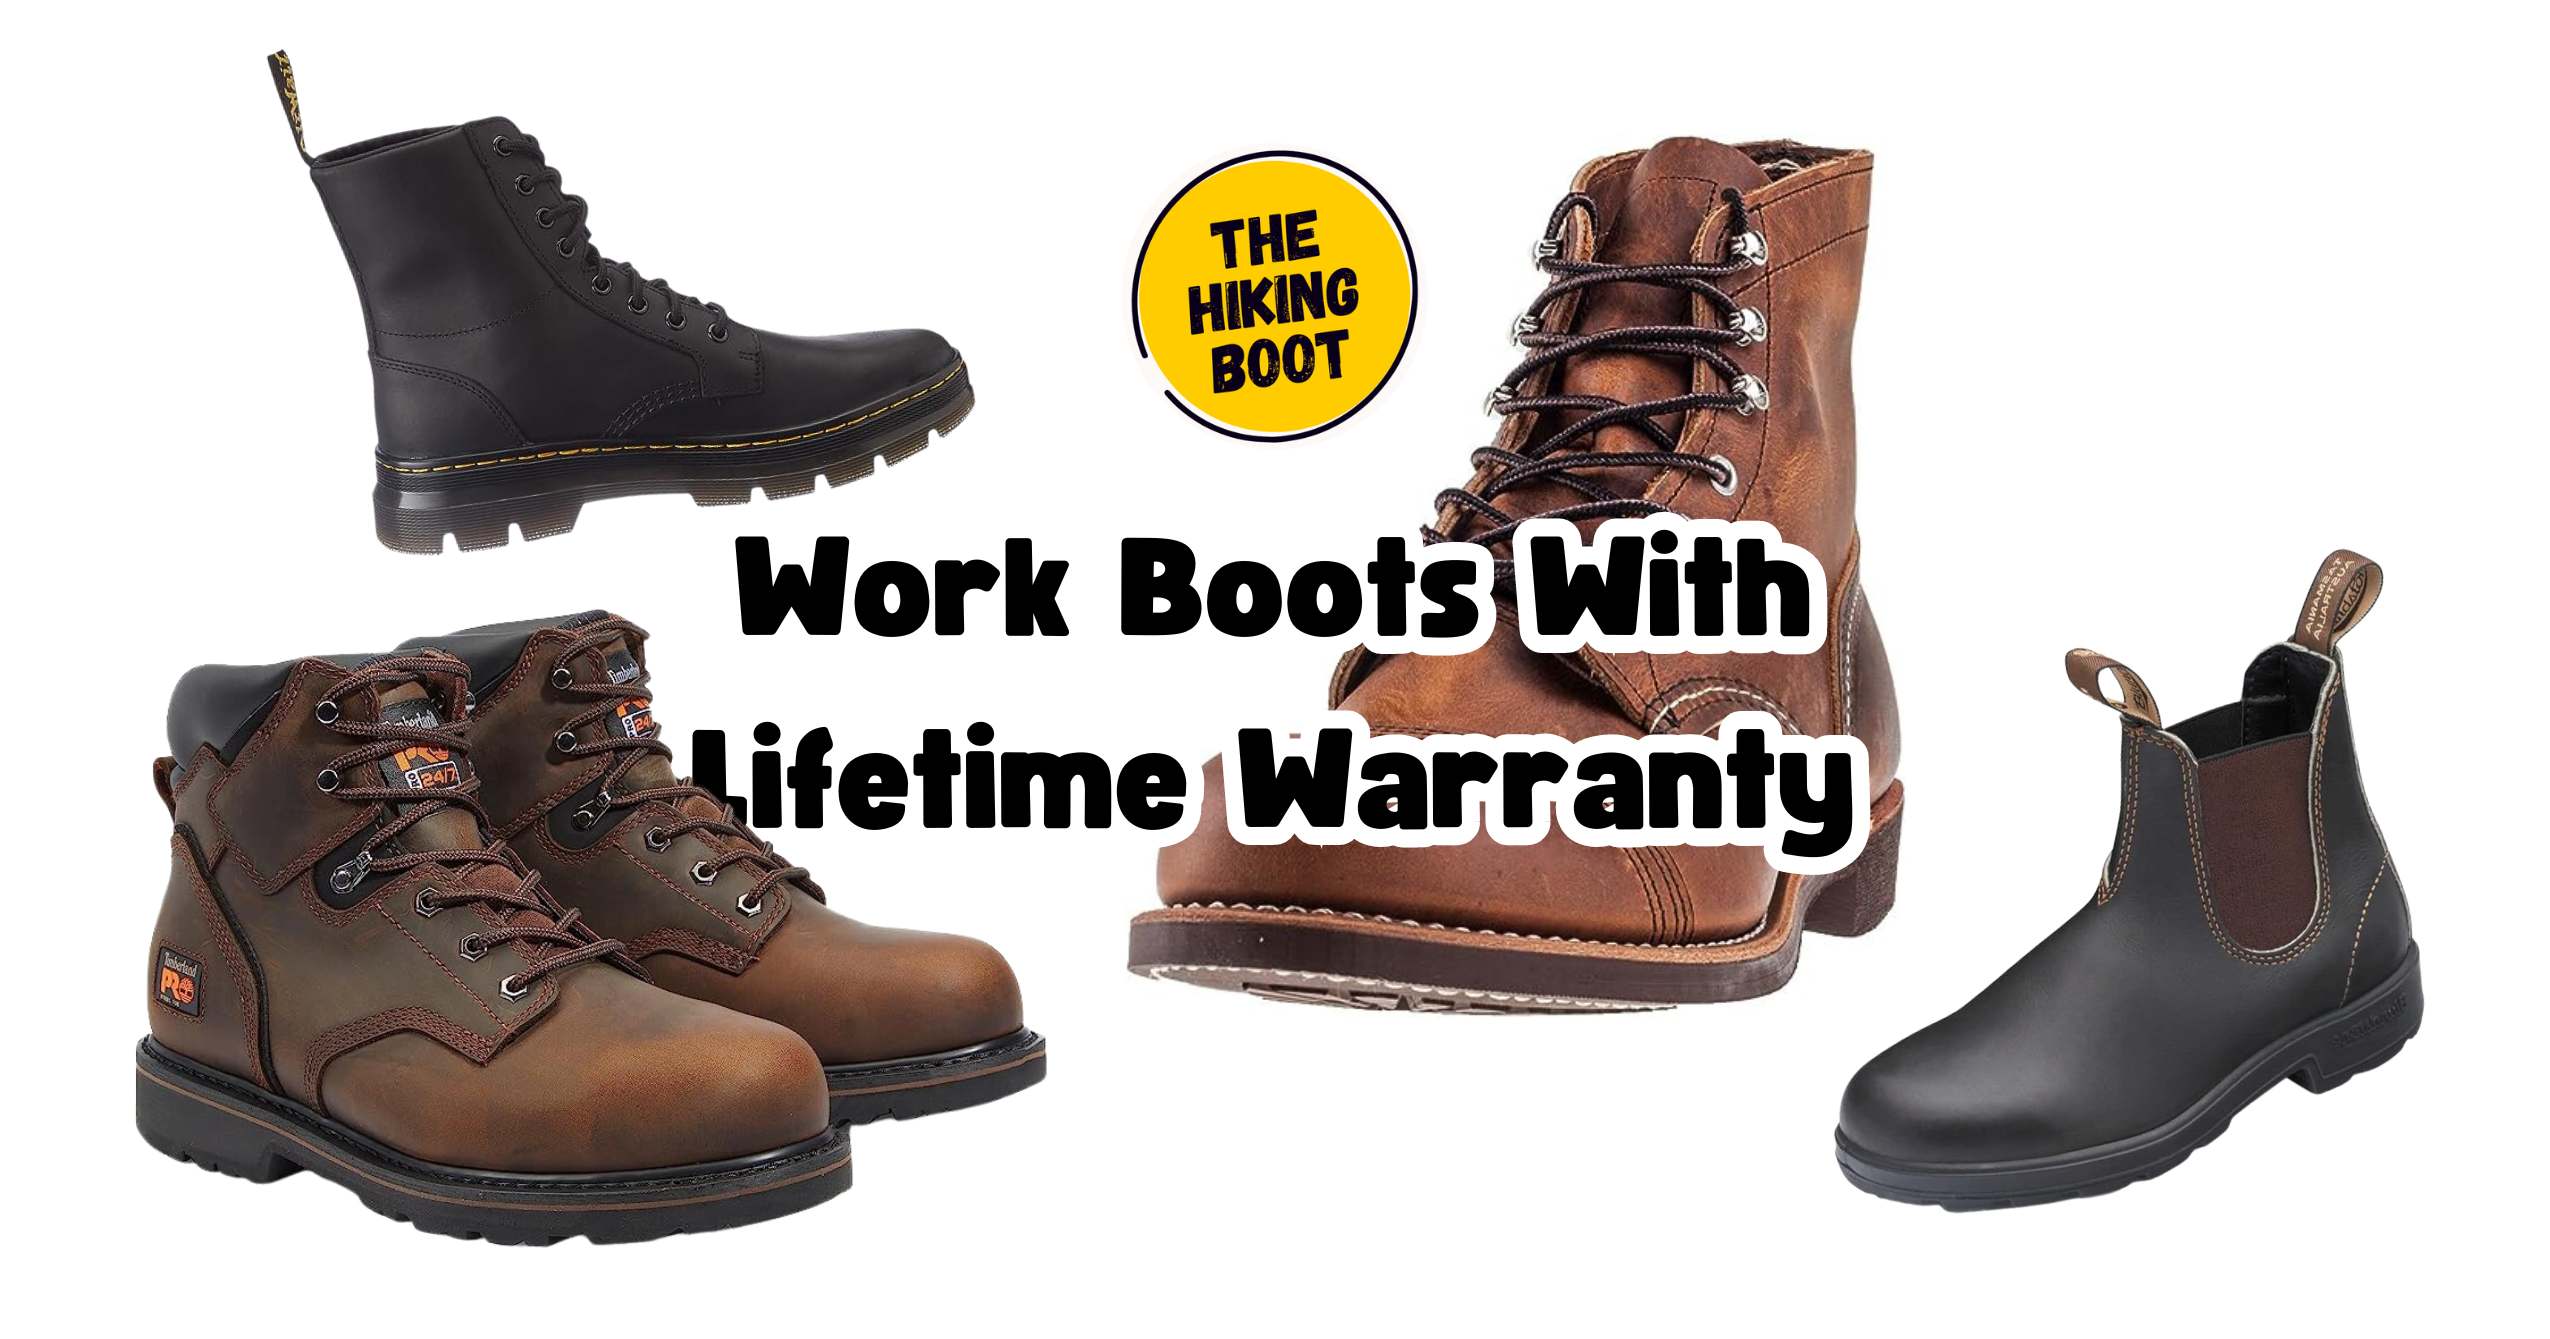 Work Boots With Lifetime Warranty